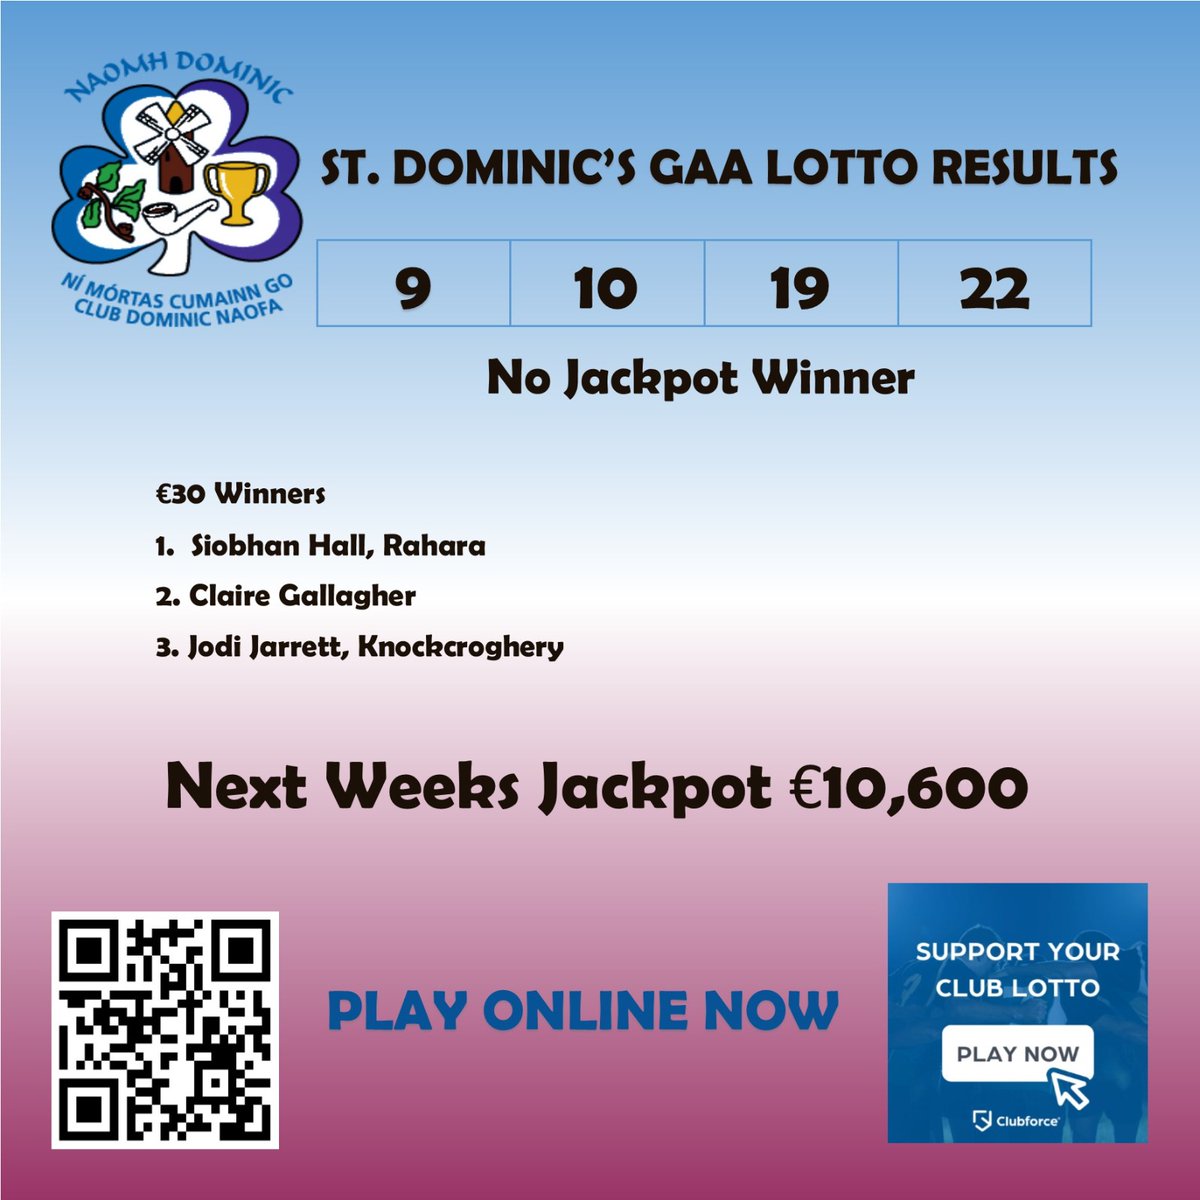 🎉🎉 Congratulations to our lucky dip winners! PLAY ONLINE NOW bit.ly/3JTAYN6 Please support our teams by supporting our lotto!!! Next draw takes place on Monday next!! Please message if you have any issues signing up!